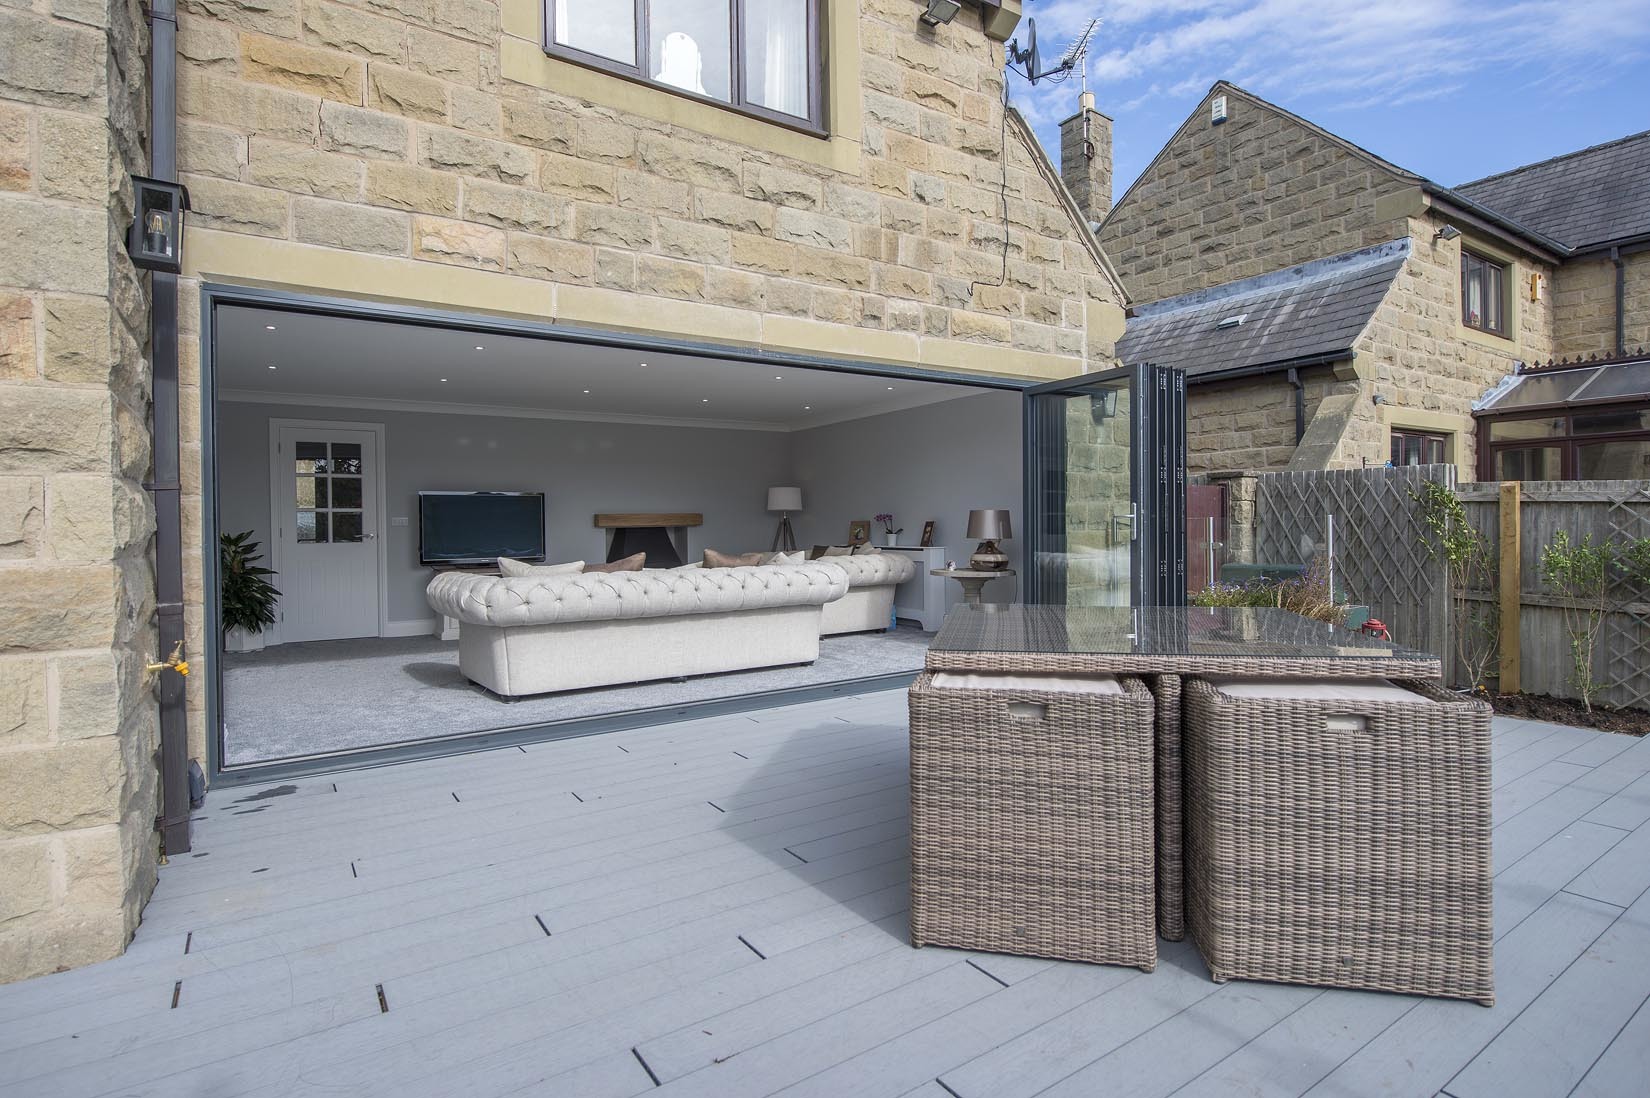 Bifold doors lead from the living room on to the refurbished terrace